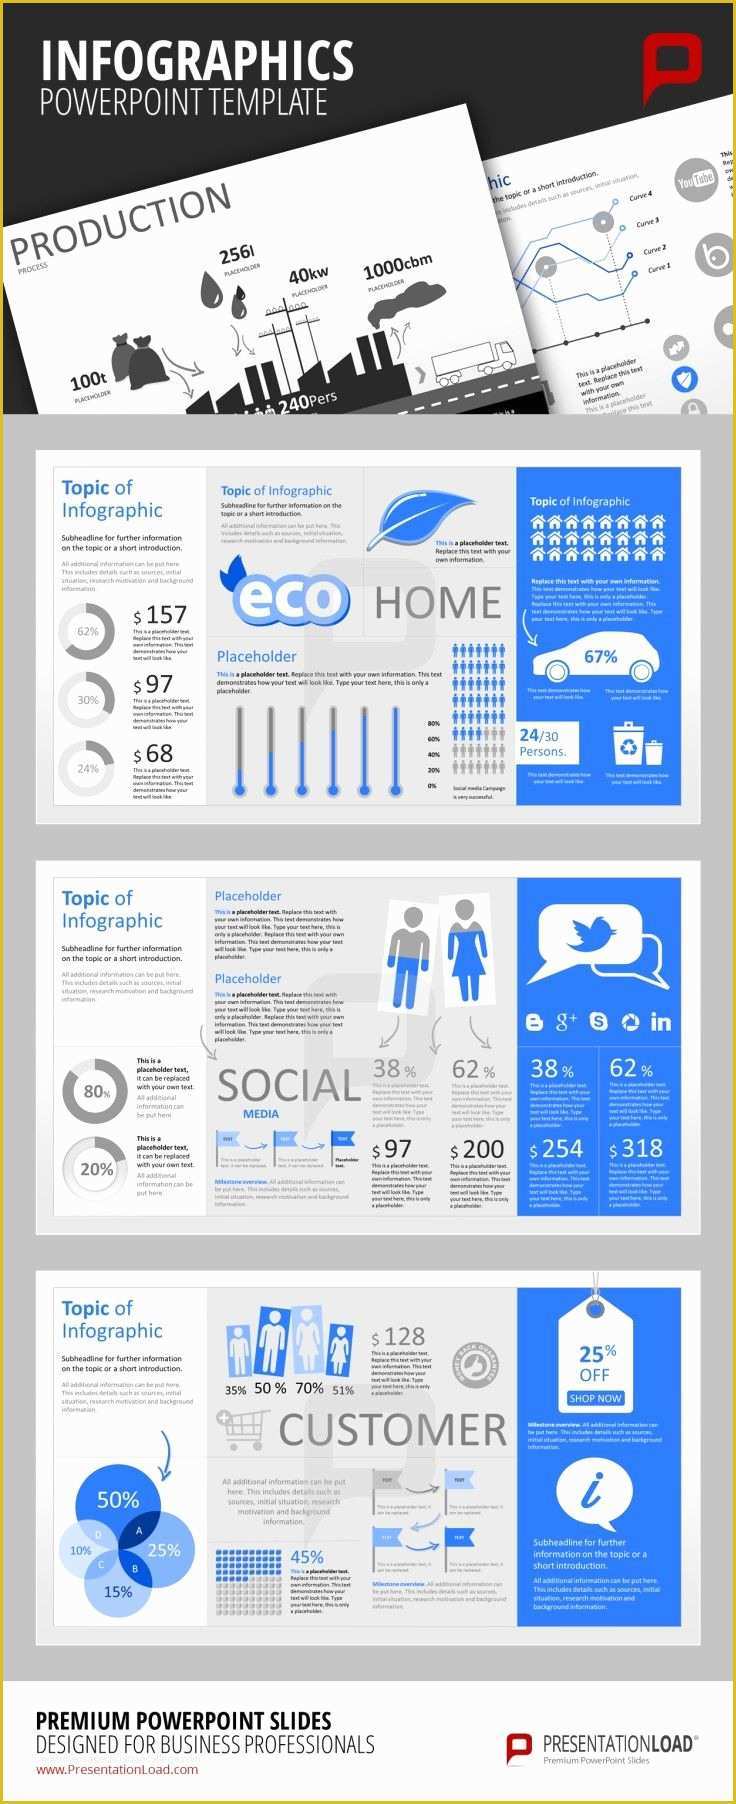 Microsoft Powerpoint Infographic Templates Free Of Infographic Powerpoint Templates Create Marketing